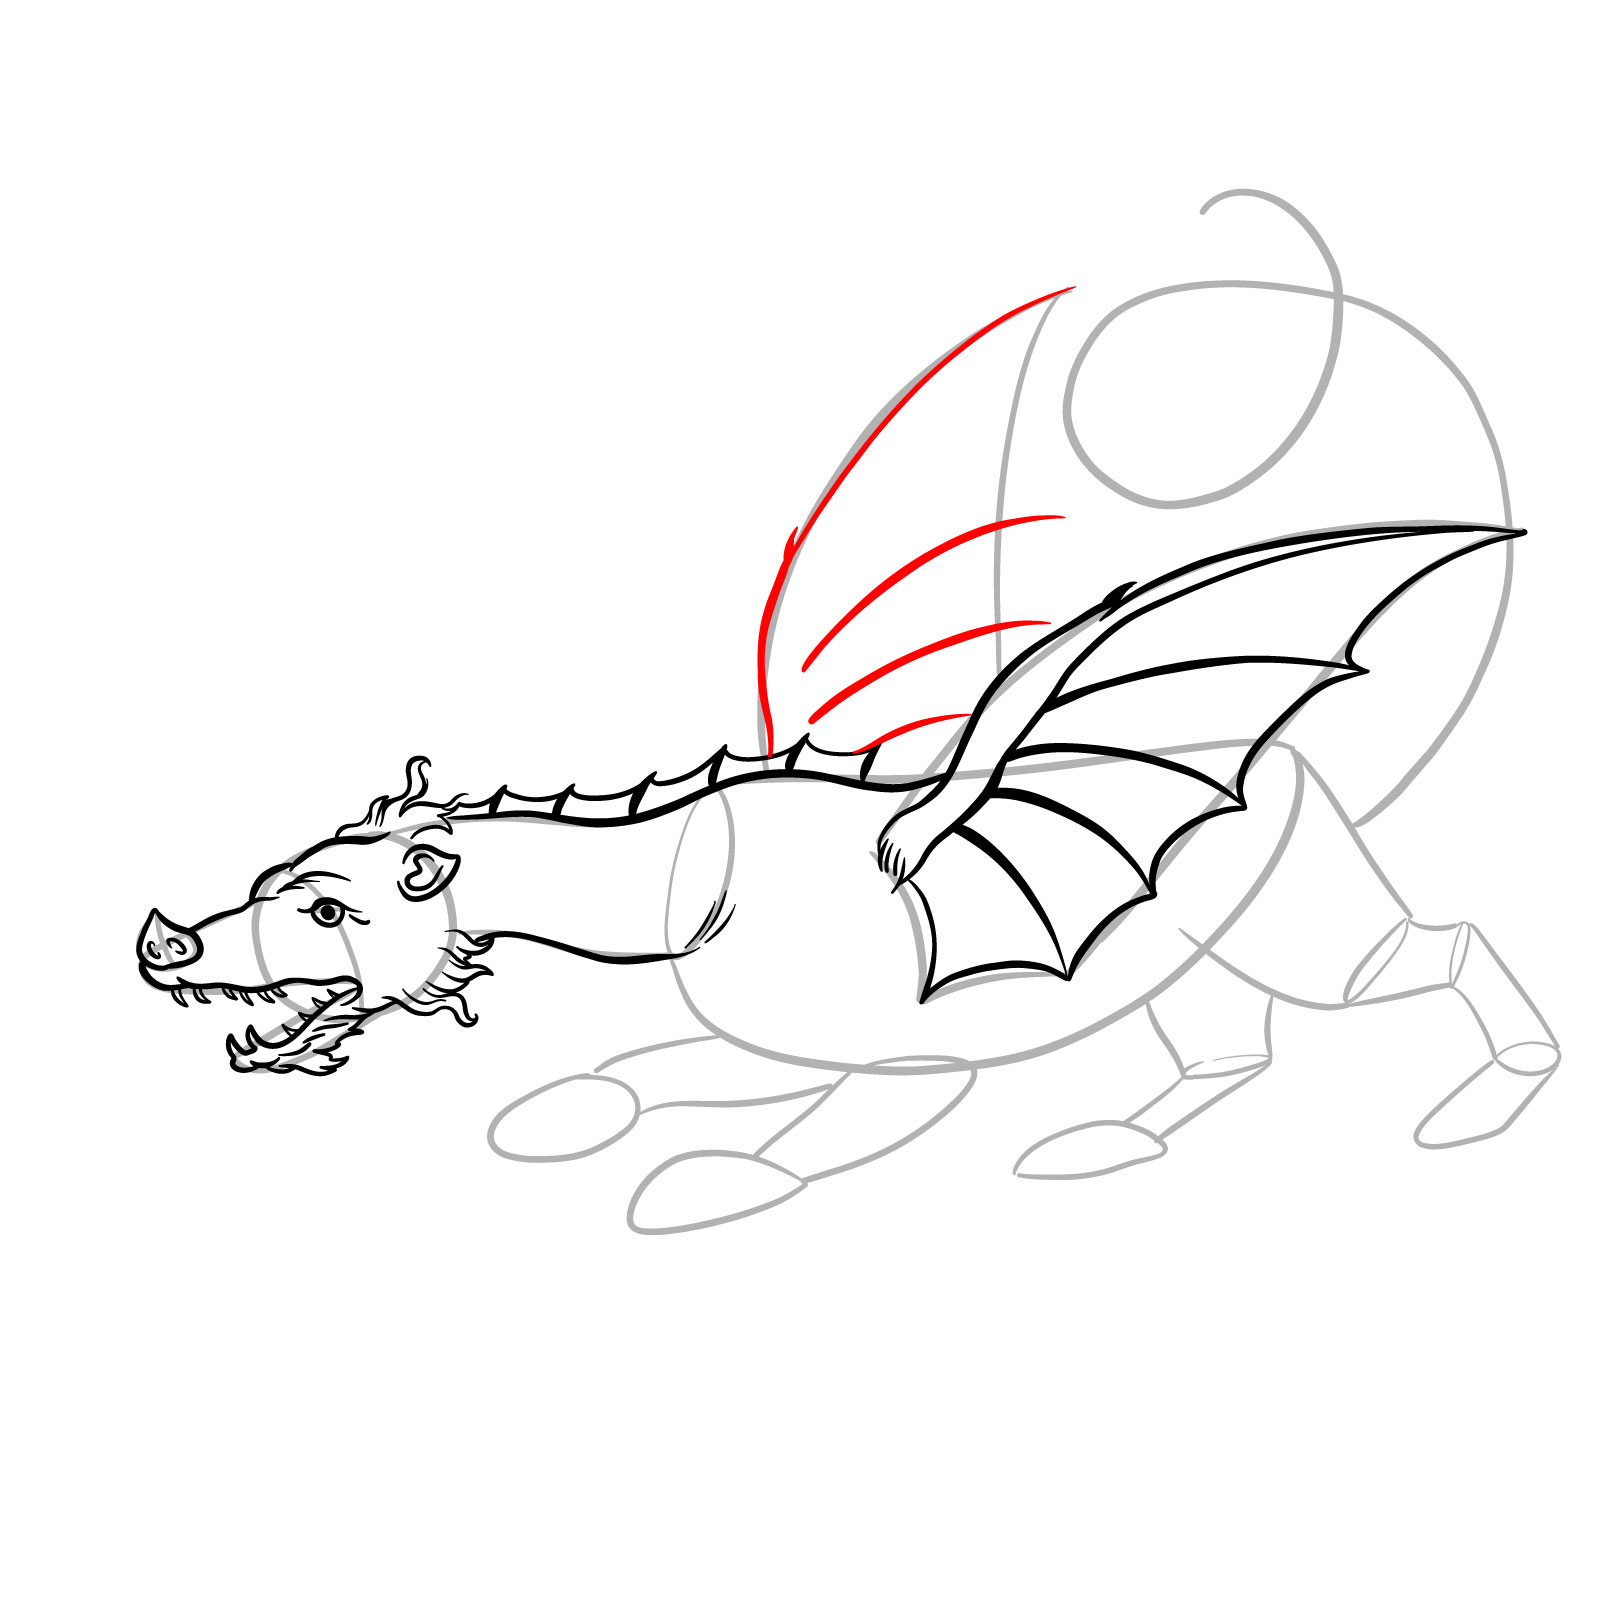 How to draw a classic European dragon - step 22